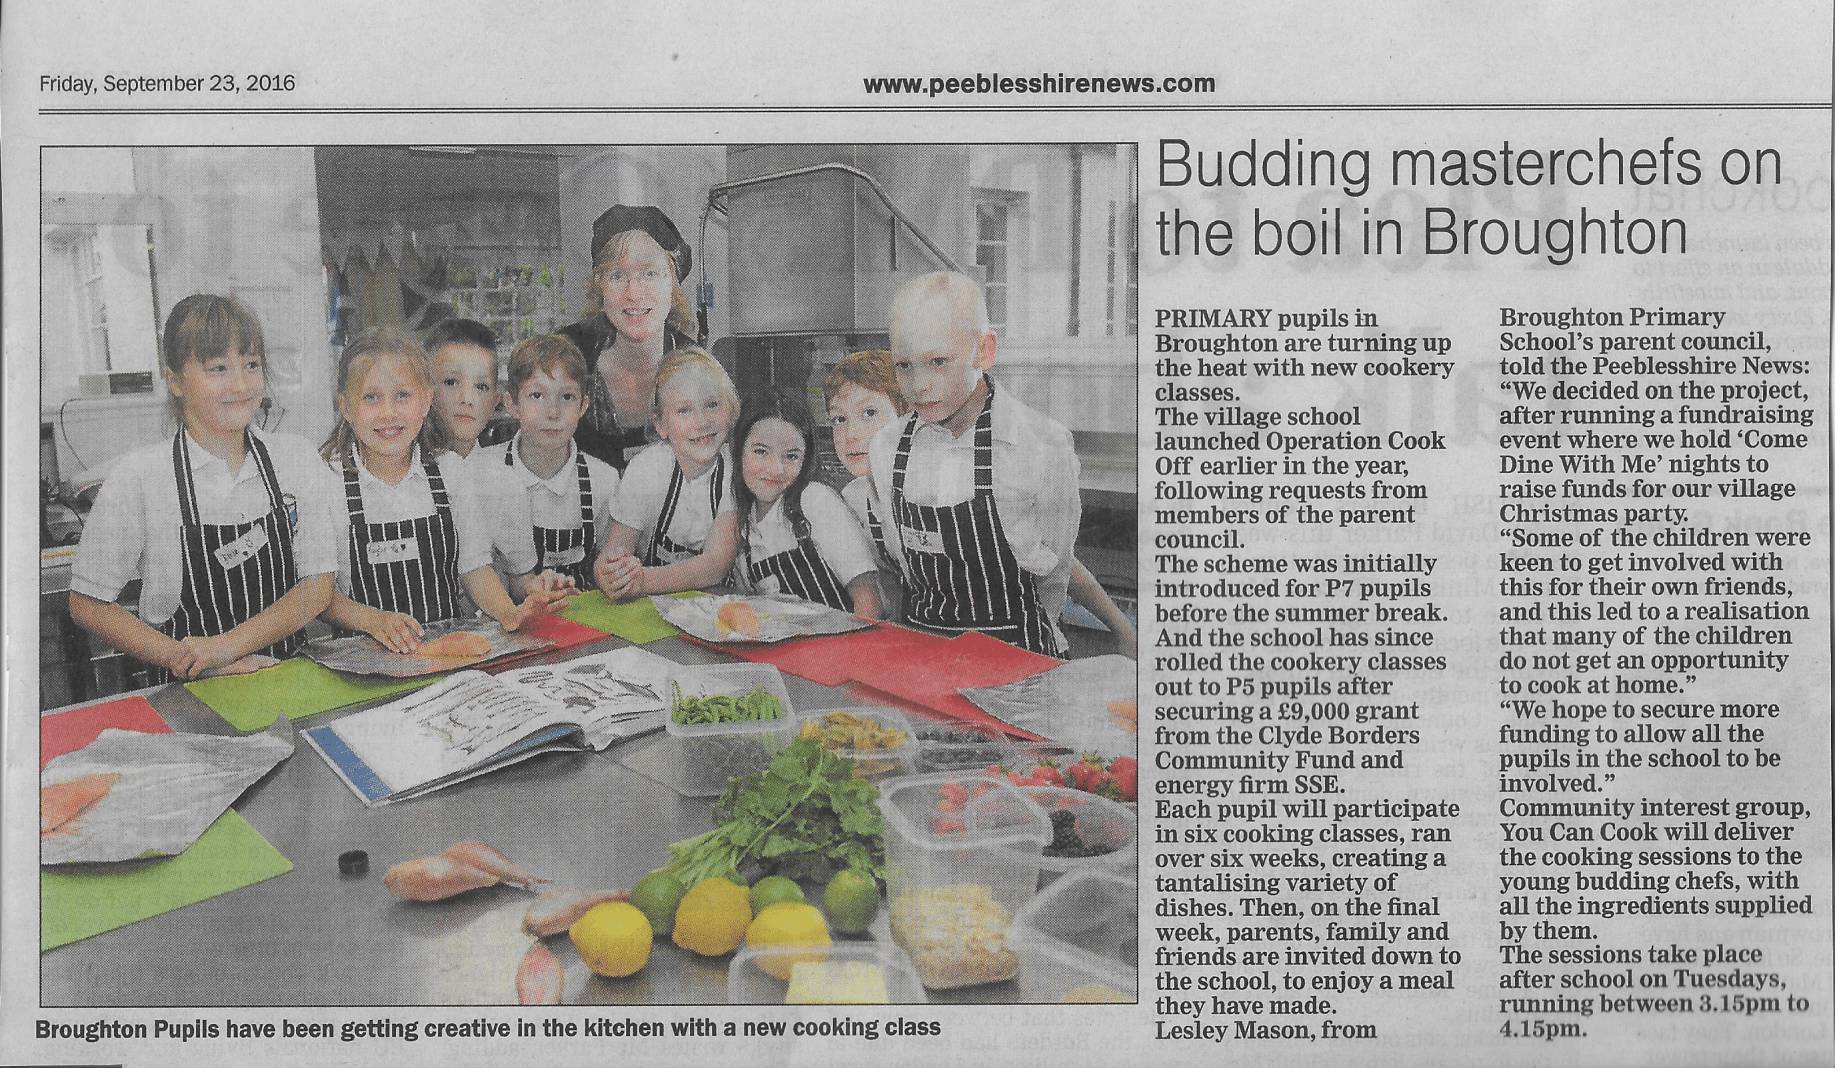 Press Clipping: Budding masterchefs on the boil in Broughton